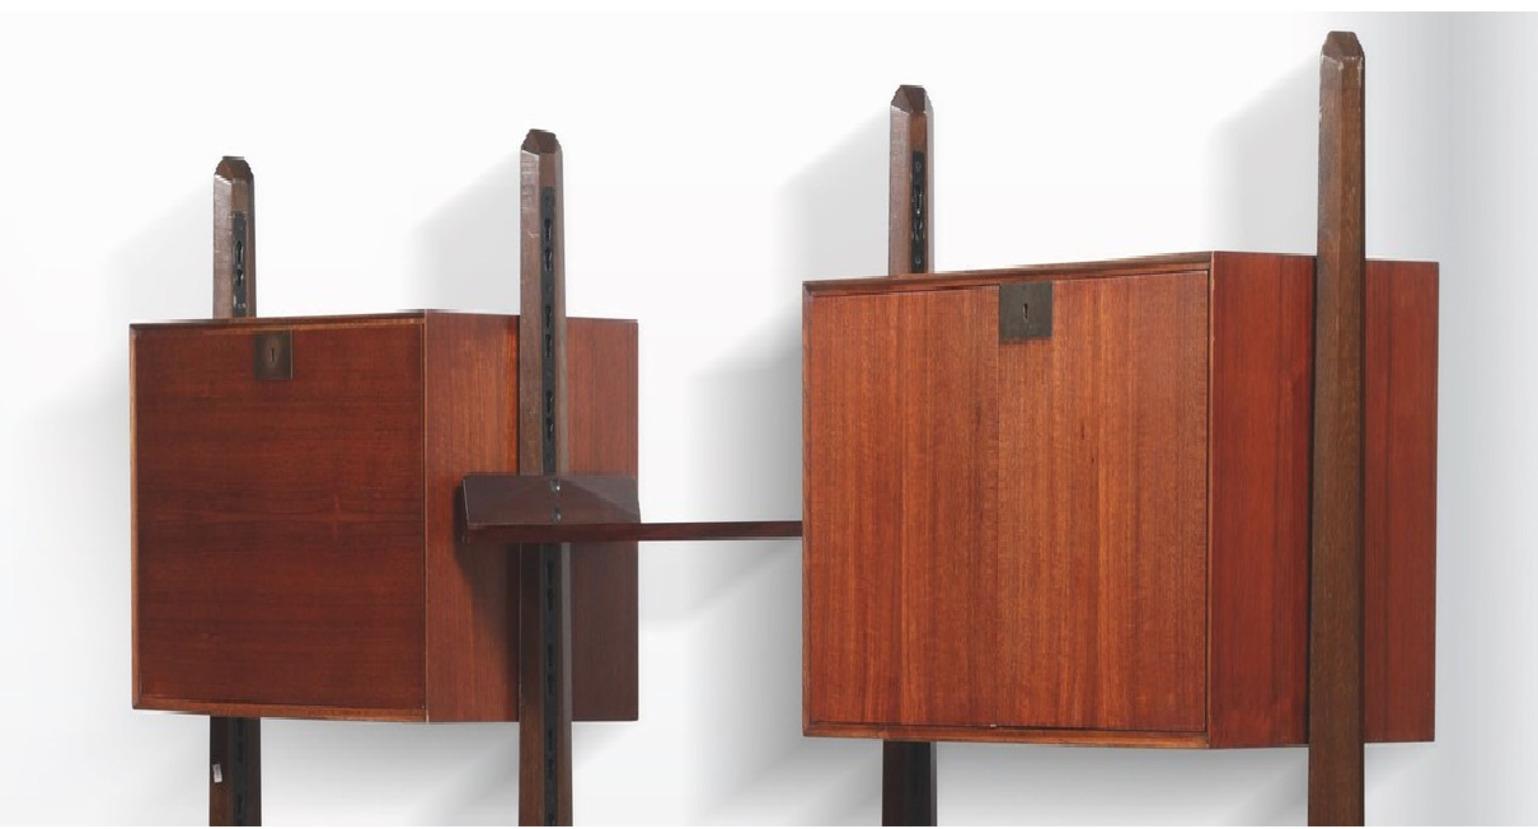 Large bookcase with storage units and shelves entirely made in wood with brass details, designed by Vittorio Dassi and manufactured by Dassi Mobili Moderni, Lissone in 1950s. 

The furniture by Vittorio Dassi, was made prevalently during the '40s